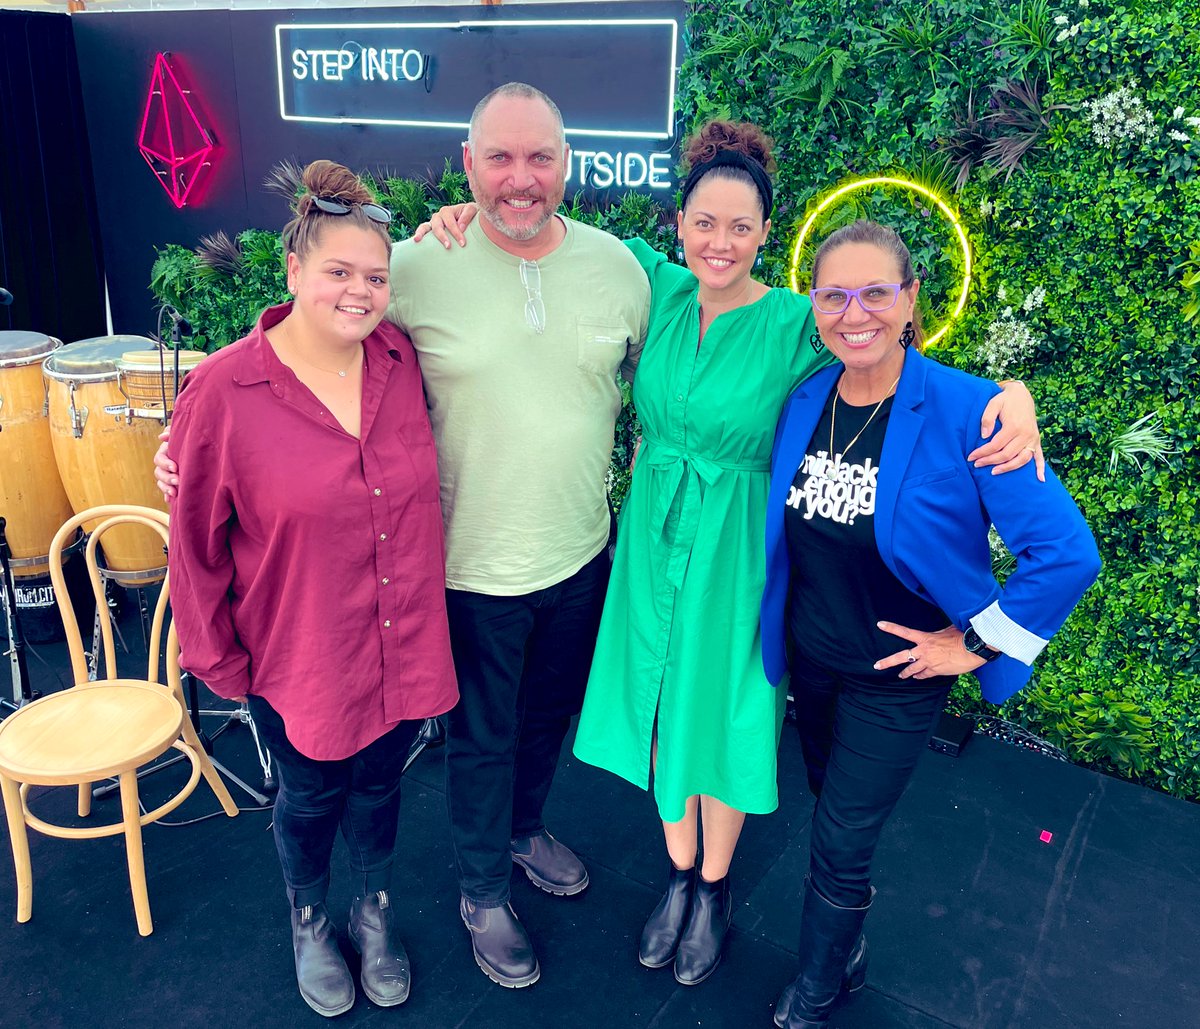 What an incredible day looking into the future and imagining what’s possible when First Nations mob are driving the agenda! Love your work Rhian Miller, @SeanAppoo and @CarlaMcGrath 

Thank you for the inspiration and wisdoms shared on #WonnaruaCountry 

Also, check out my halo!